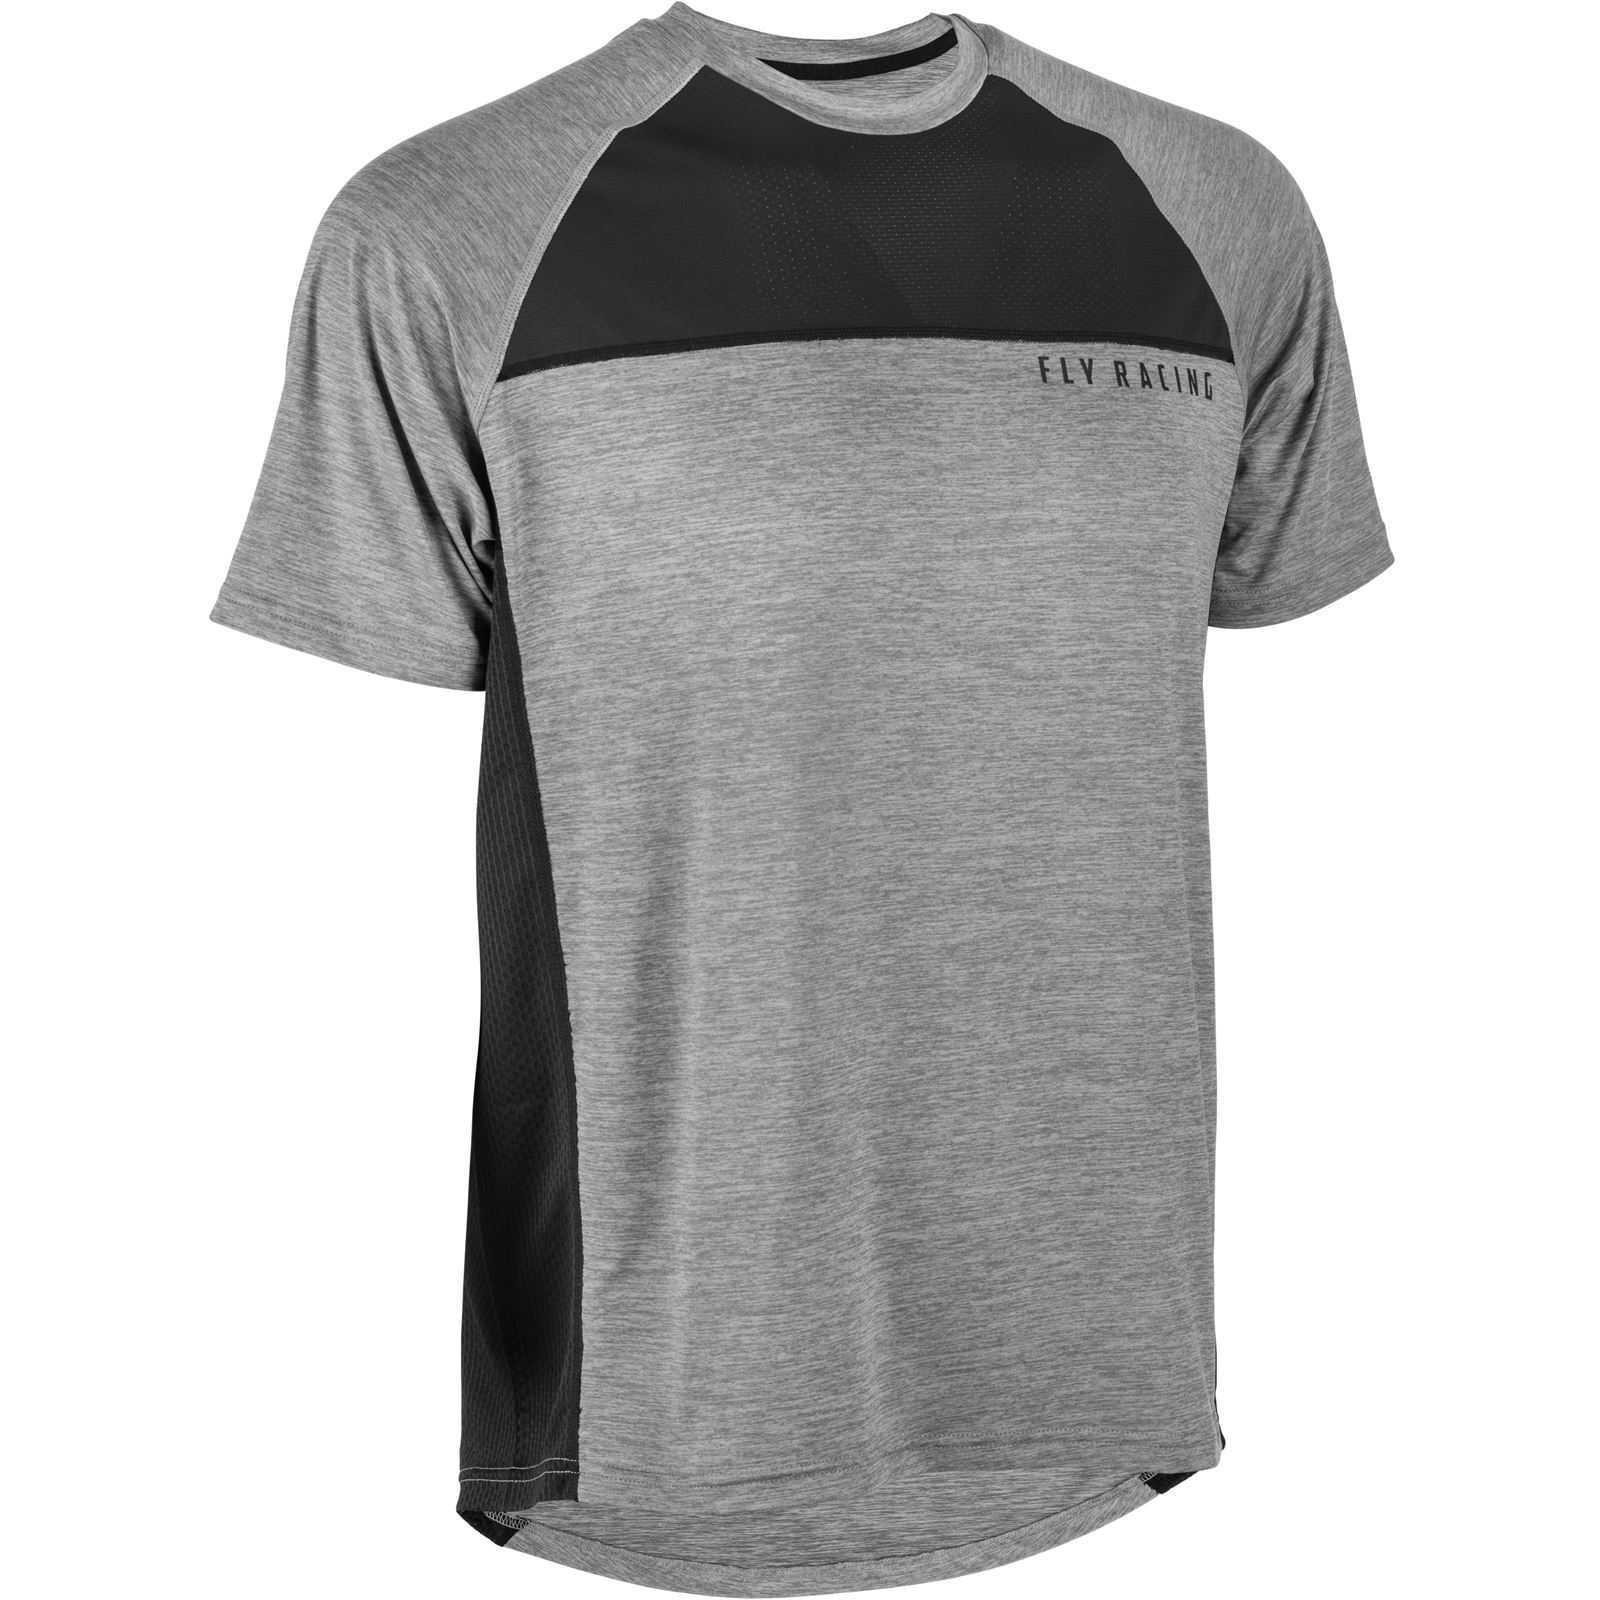 Fly Racing Super D Jersey Grey Heather, Large